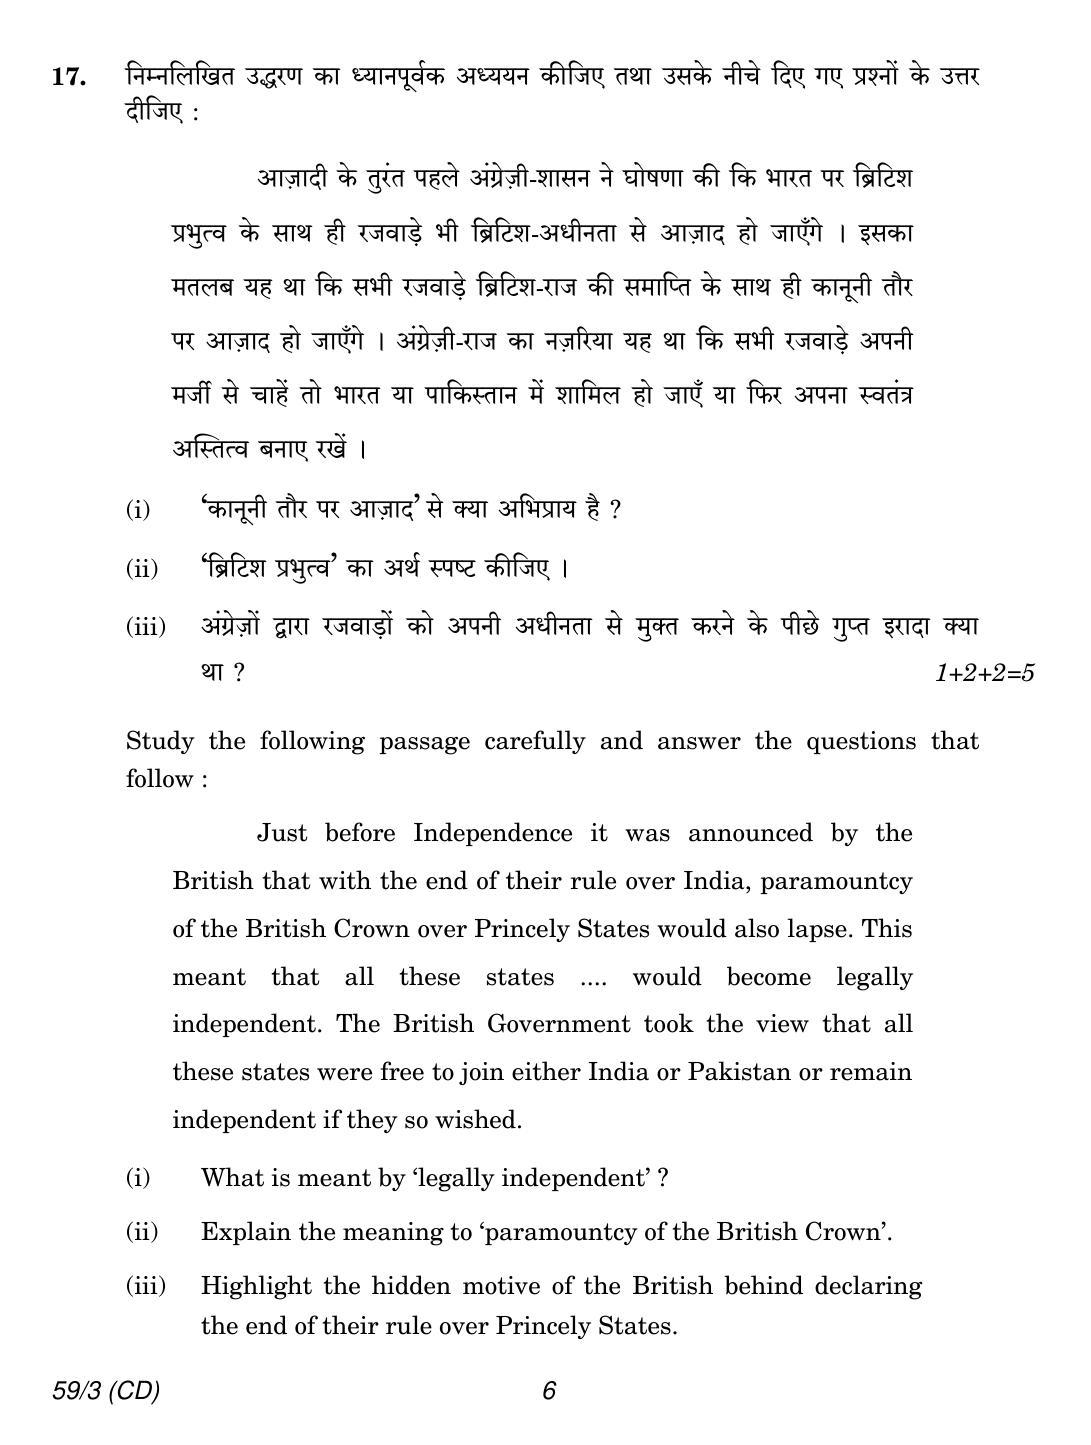 CBSE Class 12 59-3 POLITICAL SCIENCE CD 2018 Question Paper - Page 6